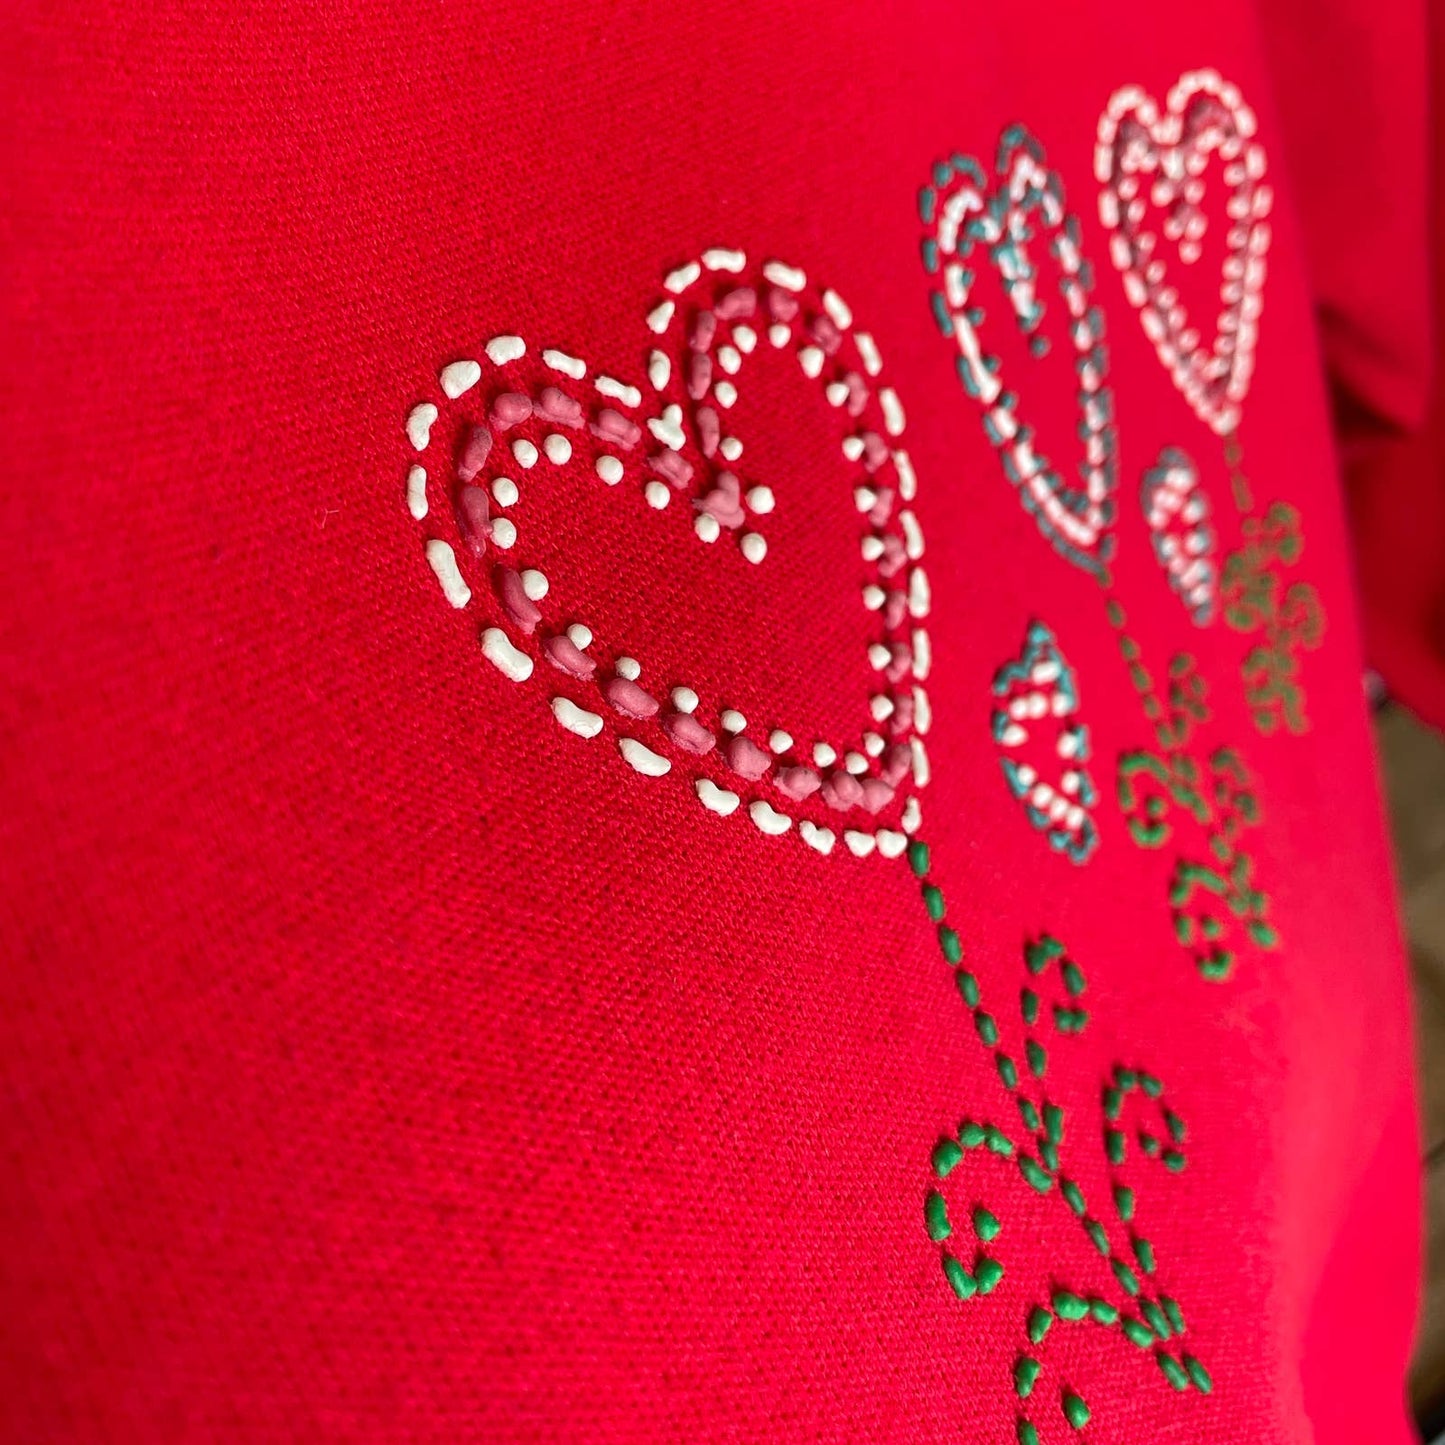 Vintage 1980s Red Sweatshirt Hearts Flowers Puff Paint Hanes Her Way Cottage B125